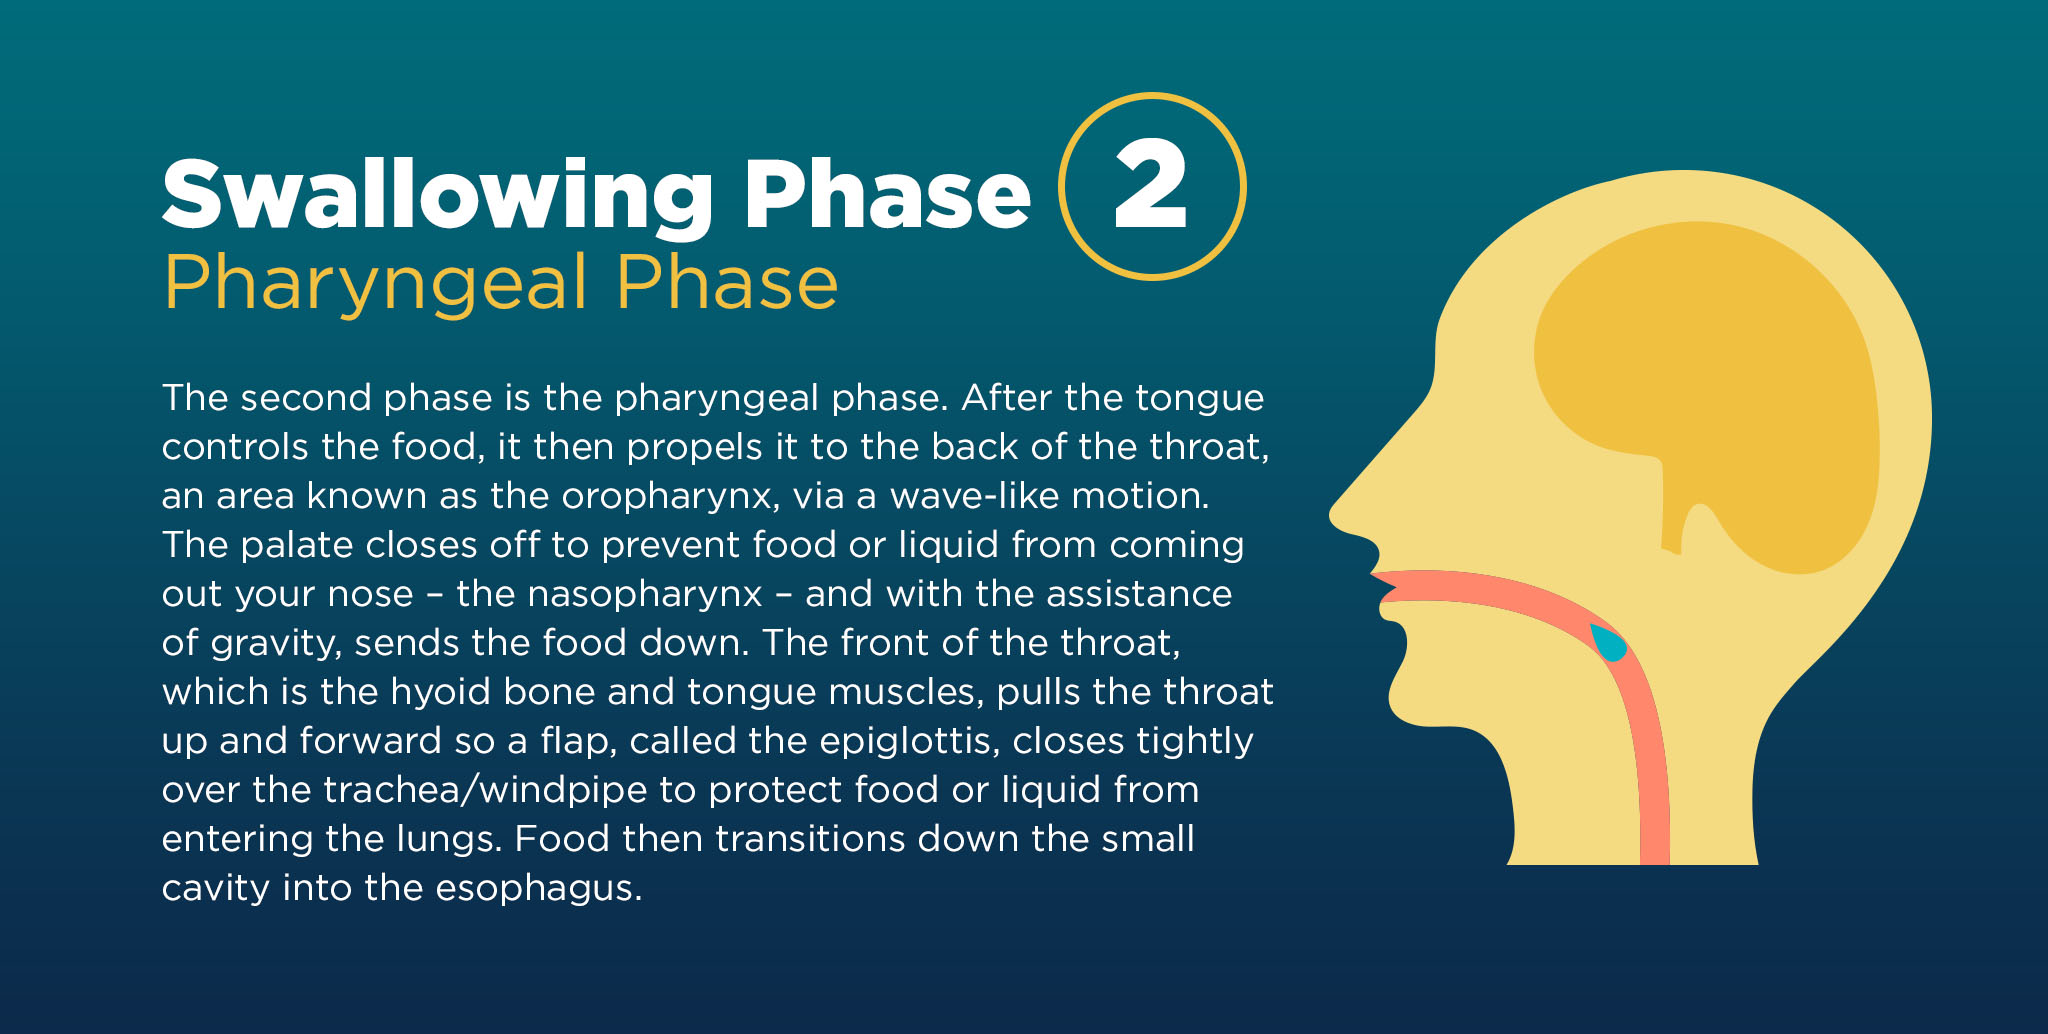 Explanation of the second phase of the swallowing process.